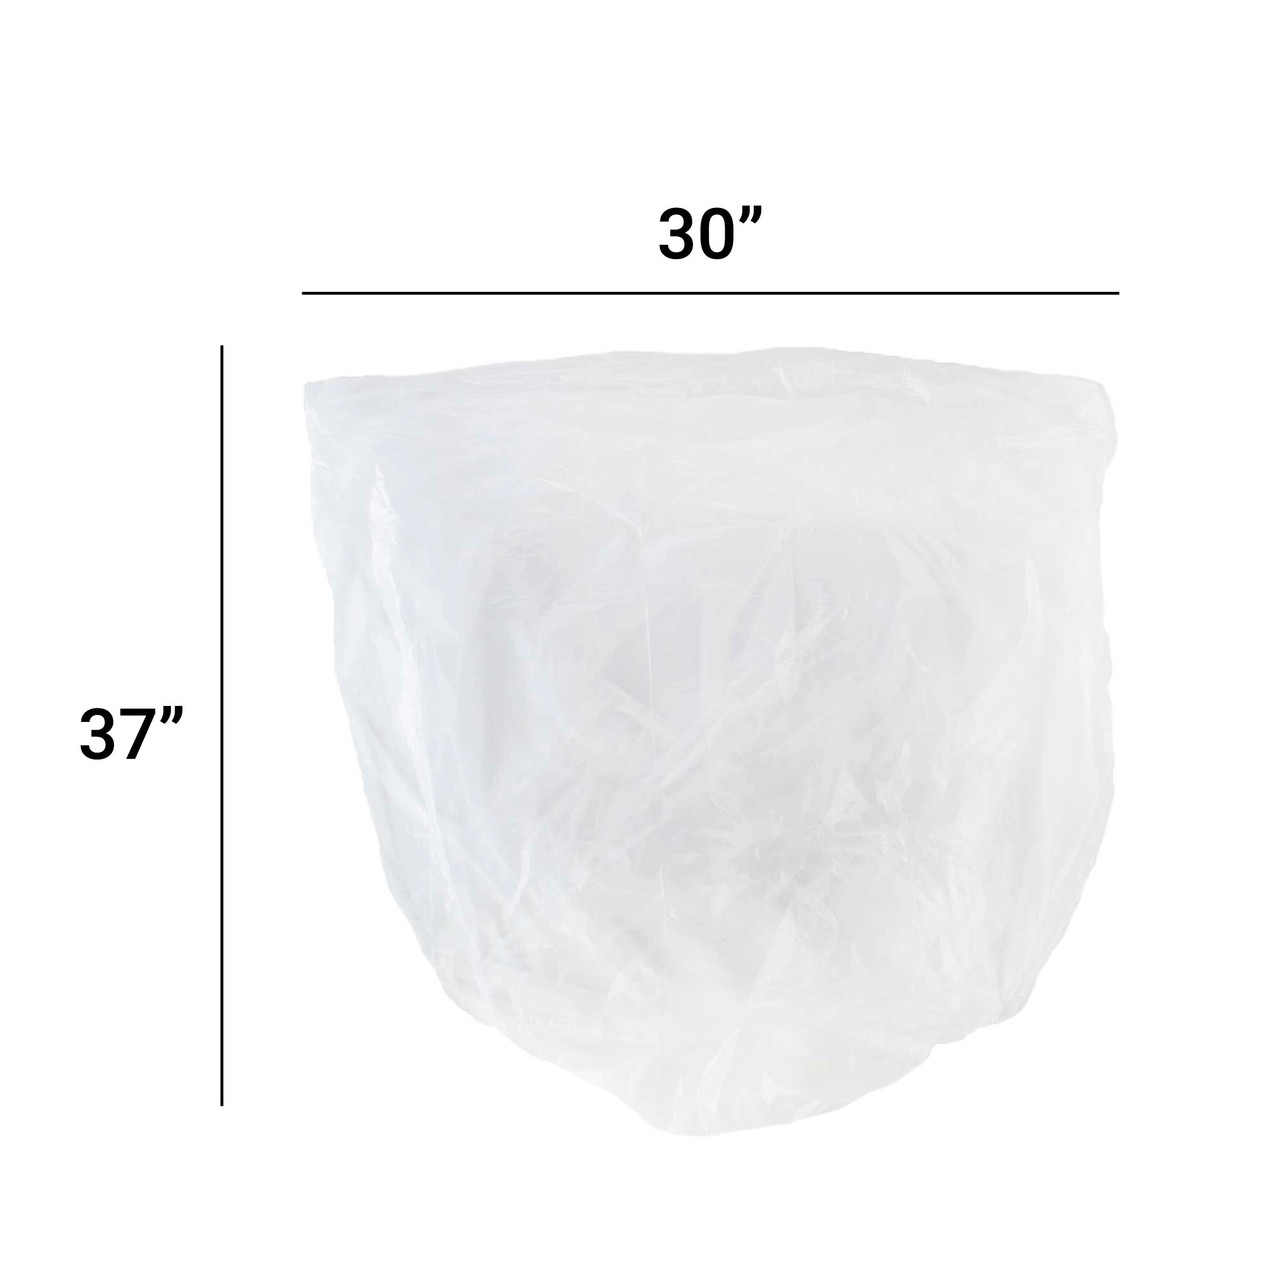 30 Gallon Black and White Large Trash Bags (120-count), Black/White